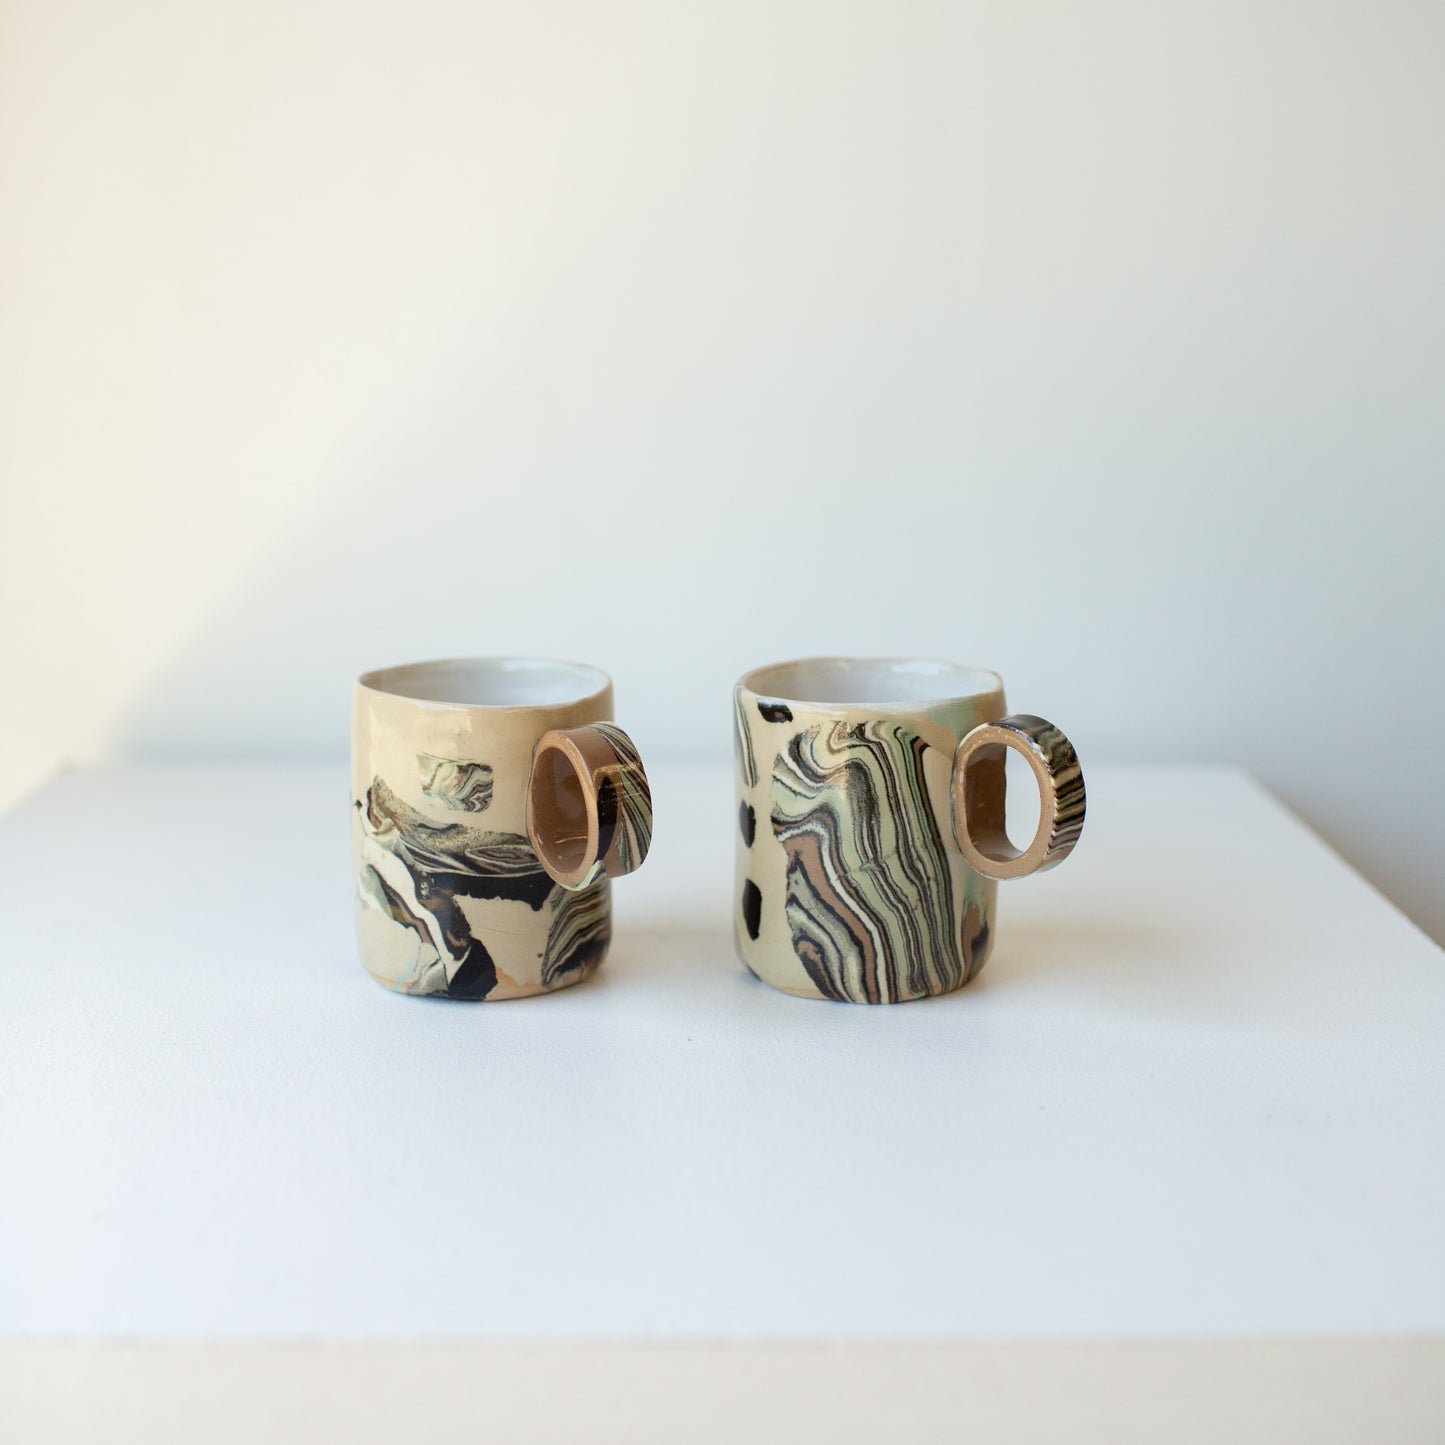 ‘Up the Cliff’ mugs